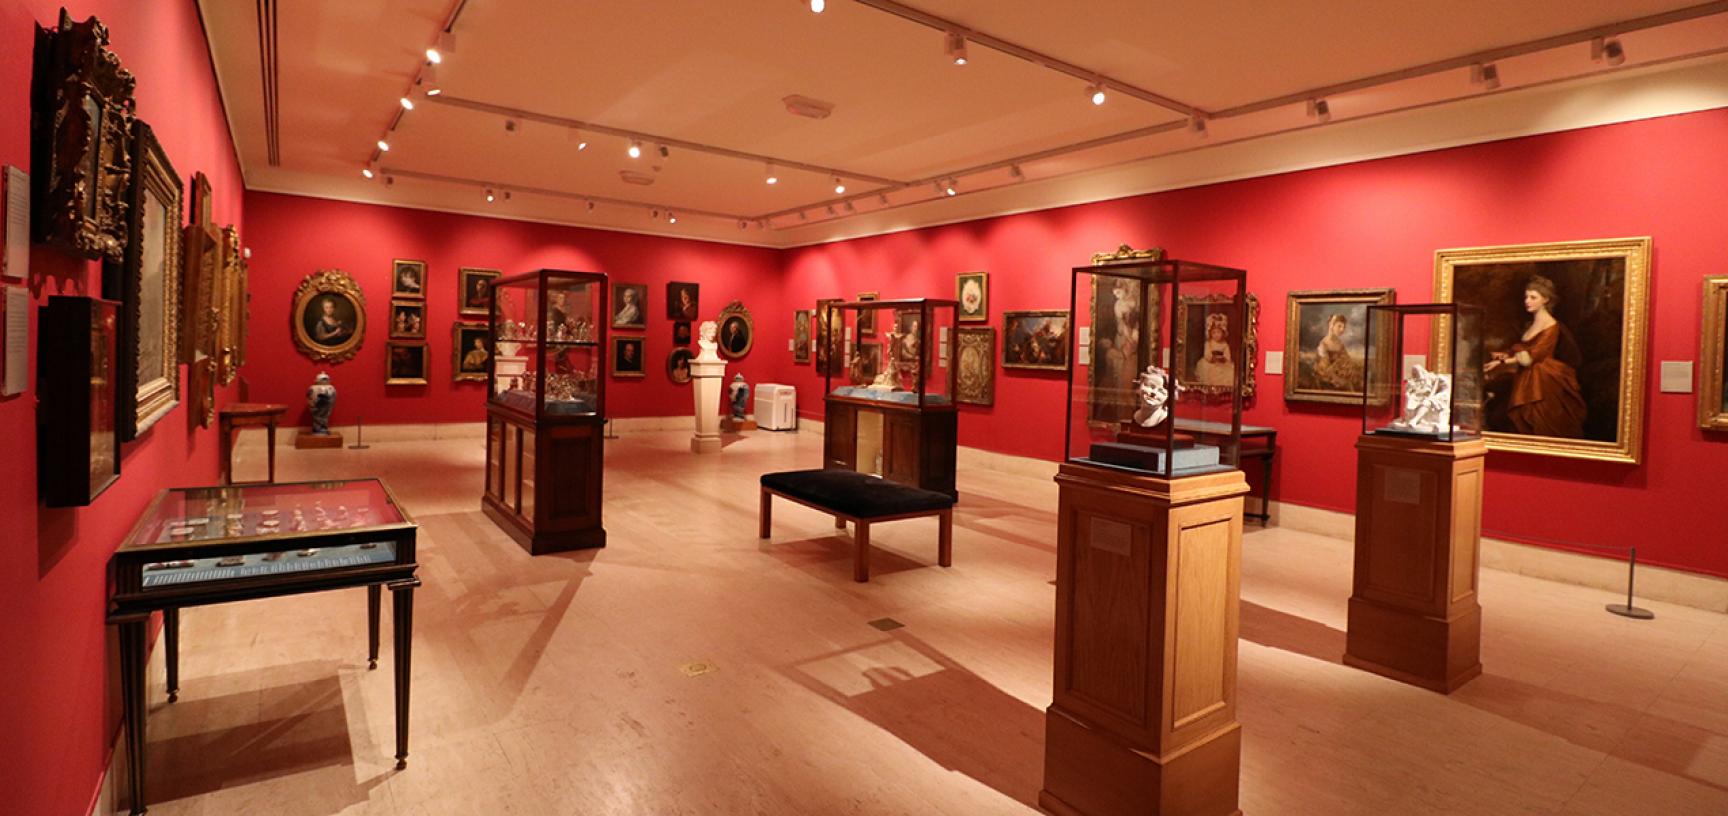  ARTS OF THE 18TH CENTURY Gallery at the Ashmolean